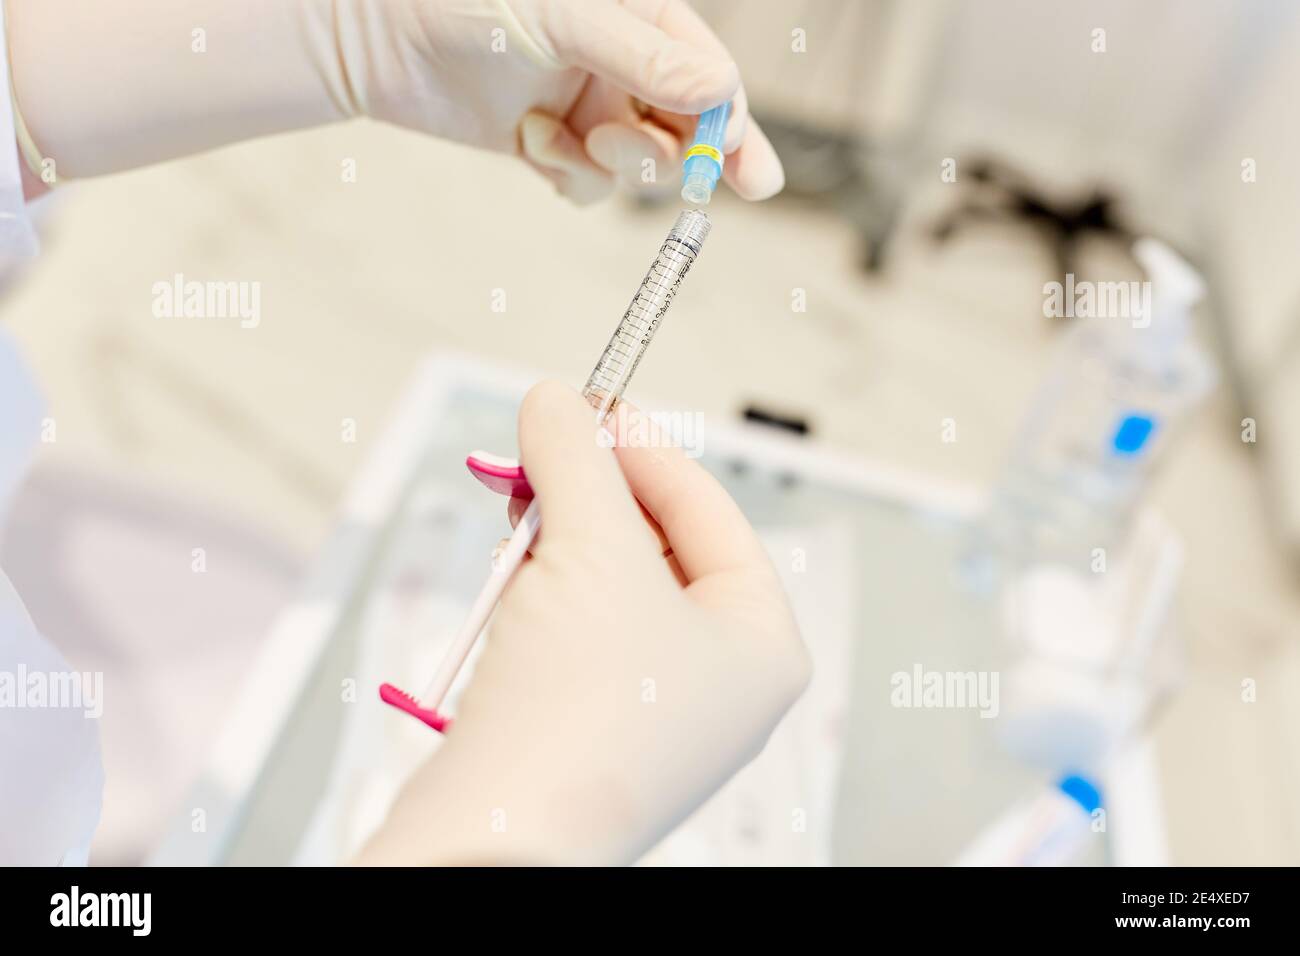 Hands in disposable gloves hold hyaluronic acid syringe for wrinkle injection Stock Photo